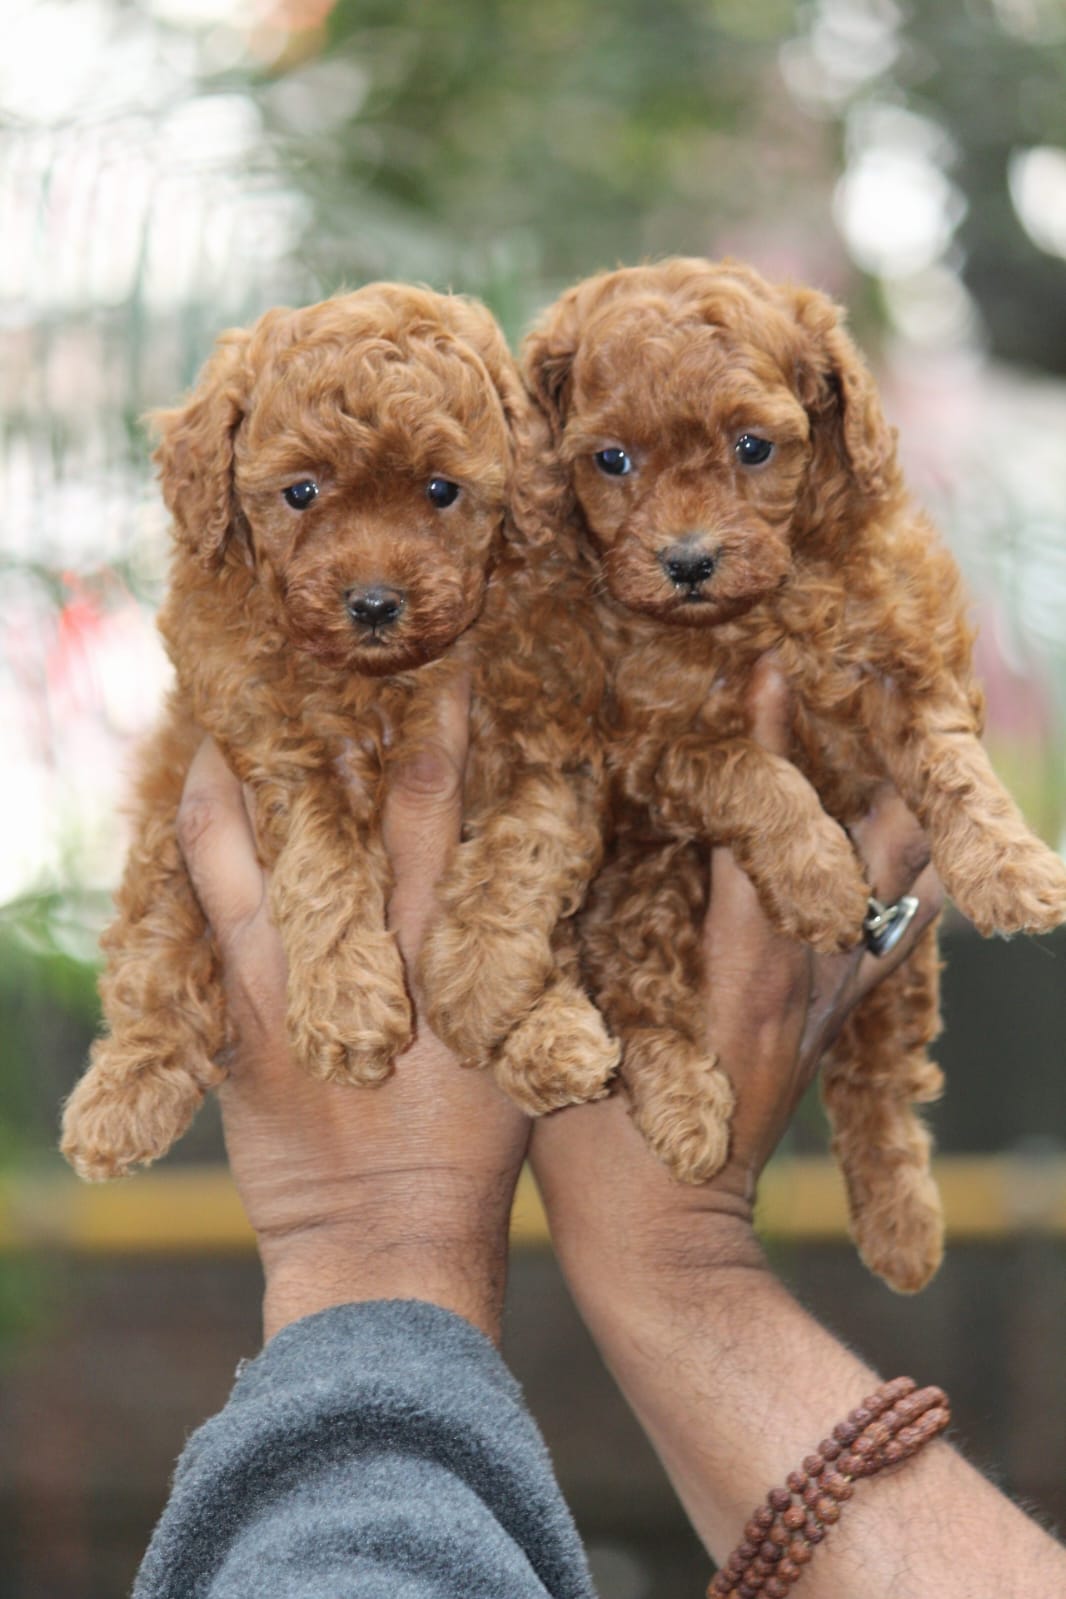 Poodle puppies from Bangalore. Breeder: Santosh